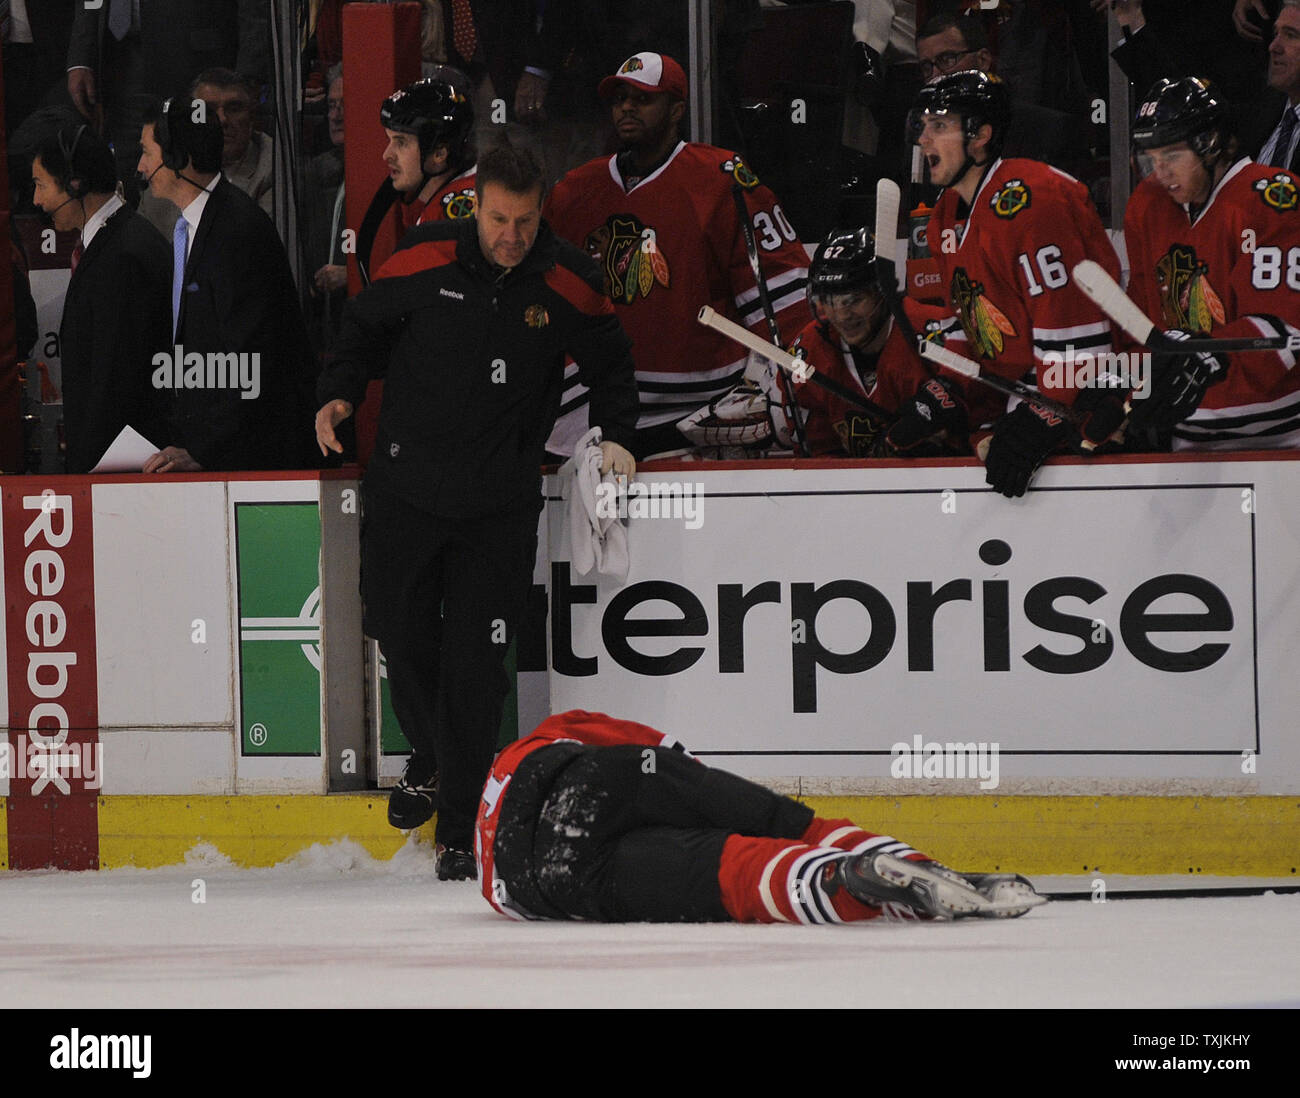 Chicago Blackhawks forward Marian Hossa (81) is knocked out by a Phoenix Coyotes player during the first  period of game 3 of the NHL Western Conference quarterfinals at the United Center on April 17, 2012 in Chicago.     UPI/David Banks Stock Photo